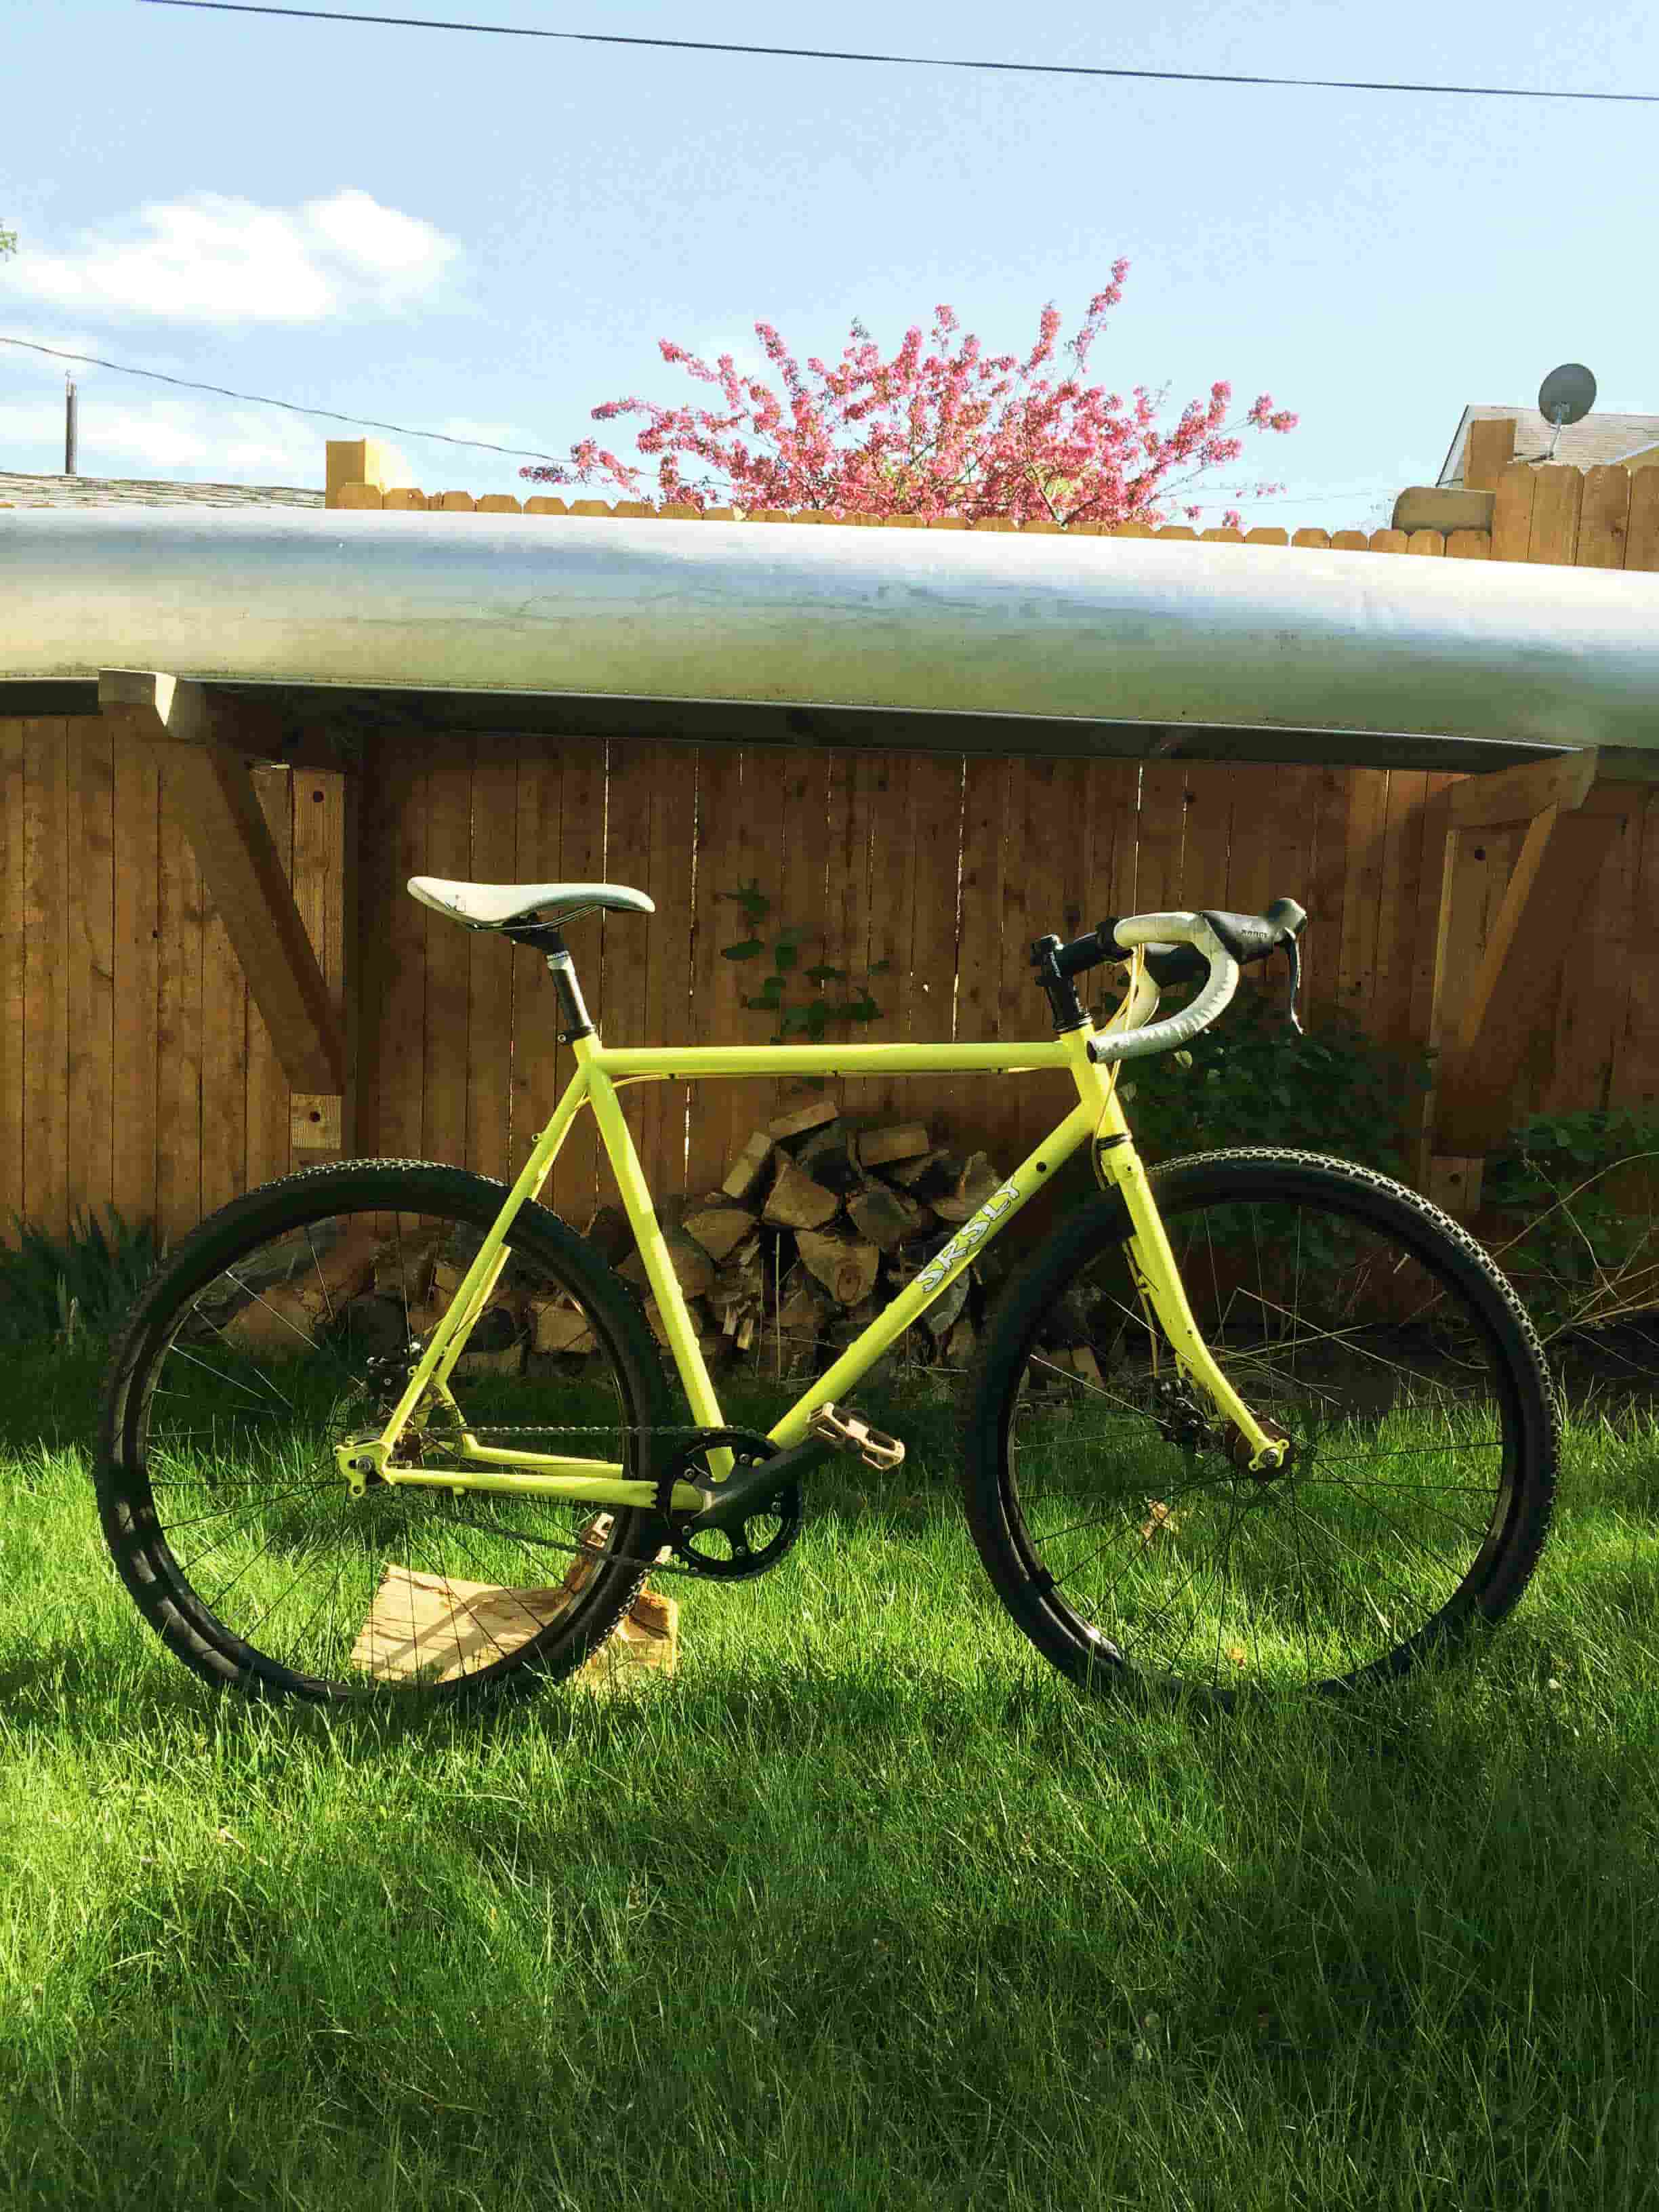 Right side view of a lime green Surly Straggler bike, parked in a grass yard, with a wood fence wall in the background